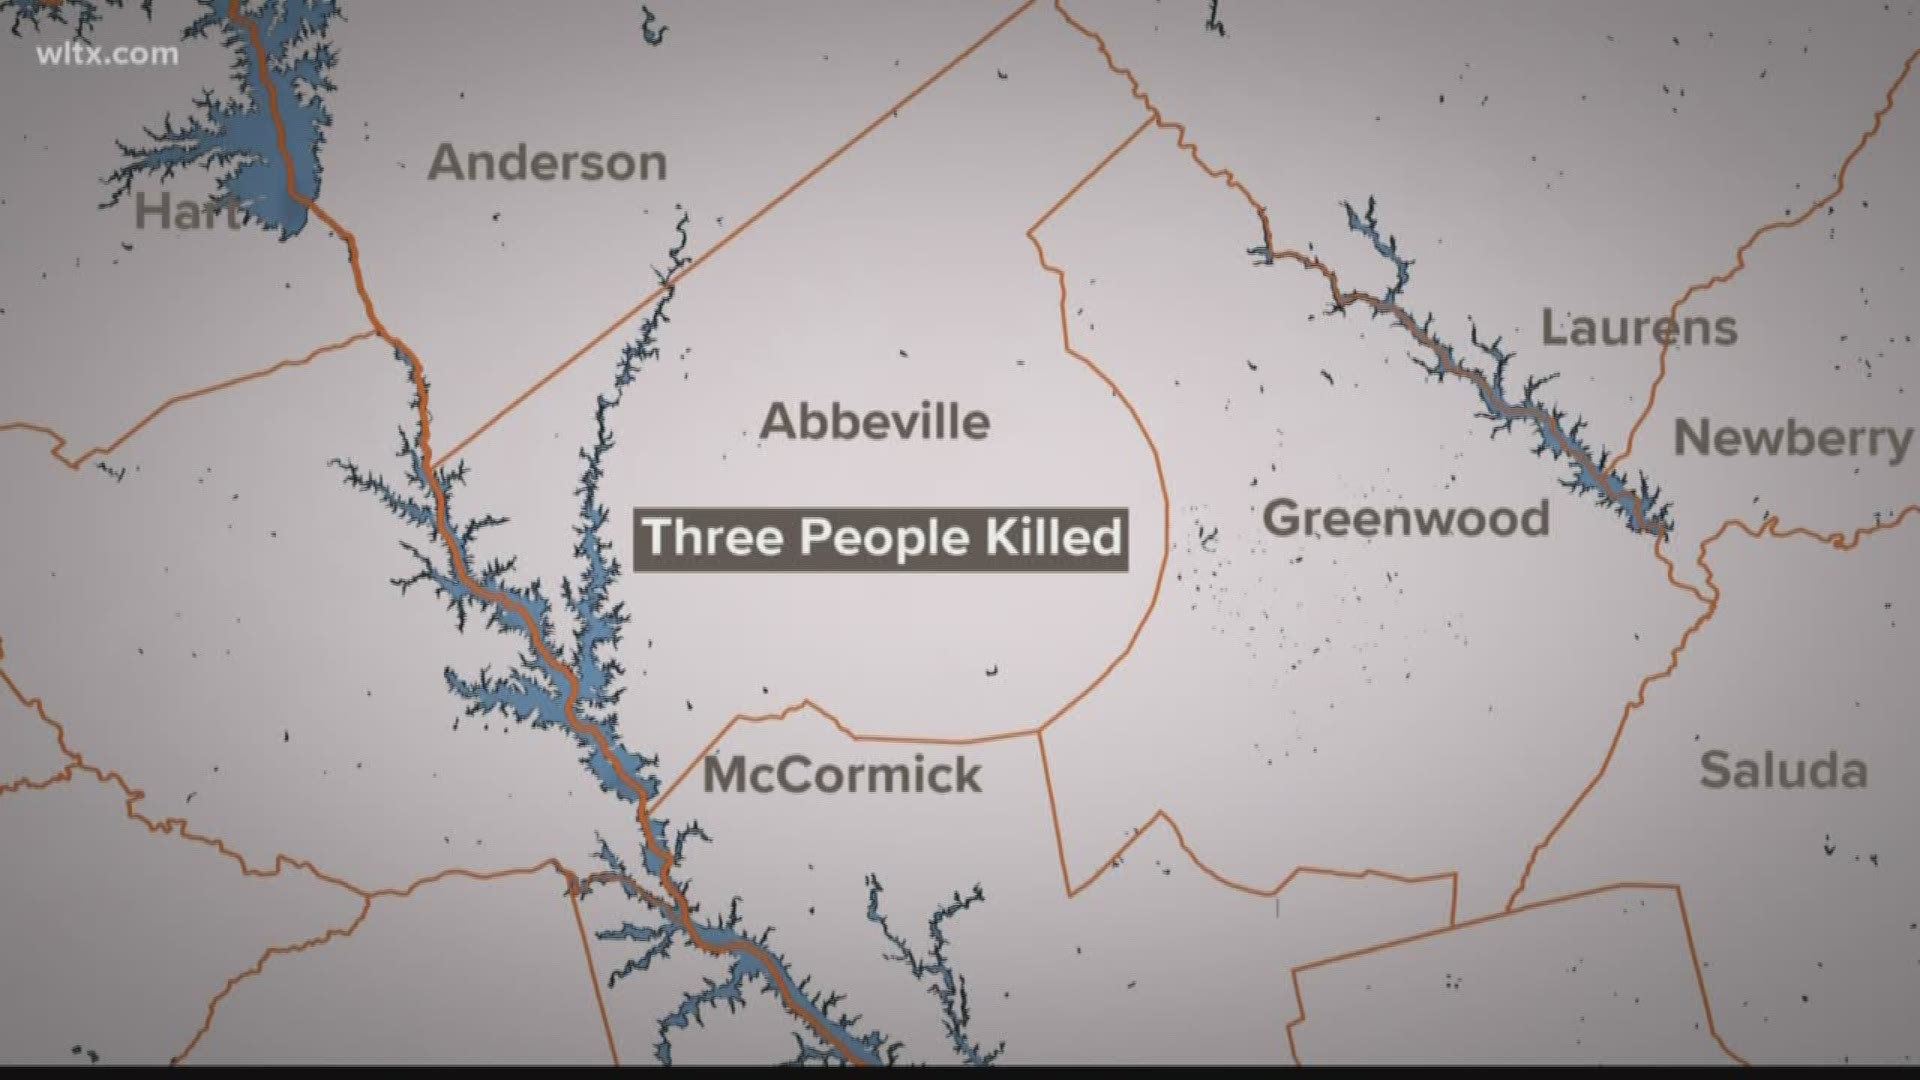 SLED announces that a suspect wanted for killing three people in Abbeville has been arrested.